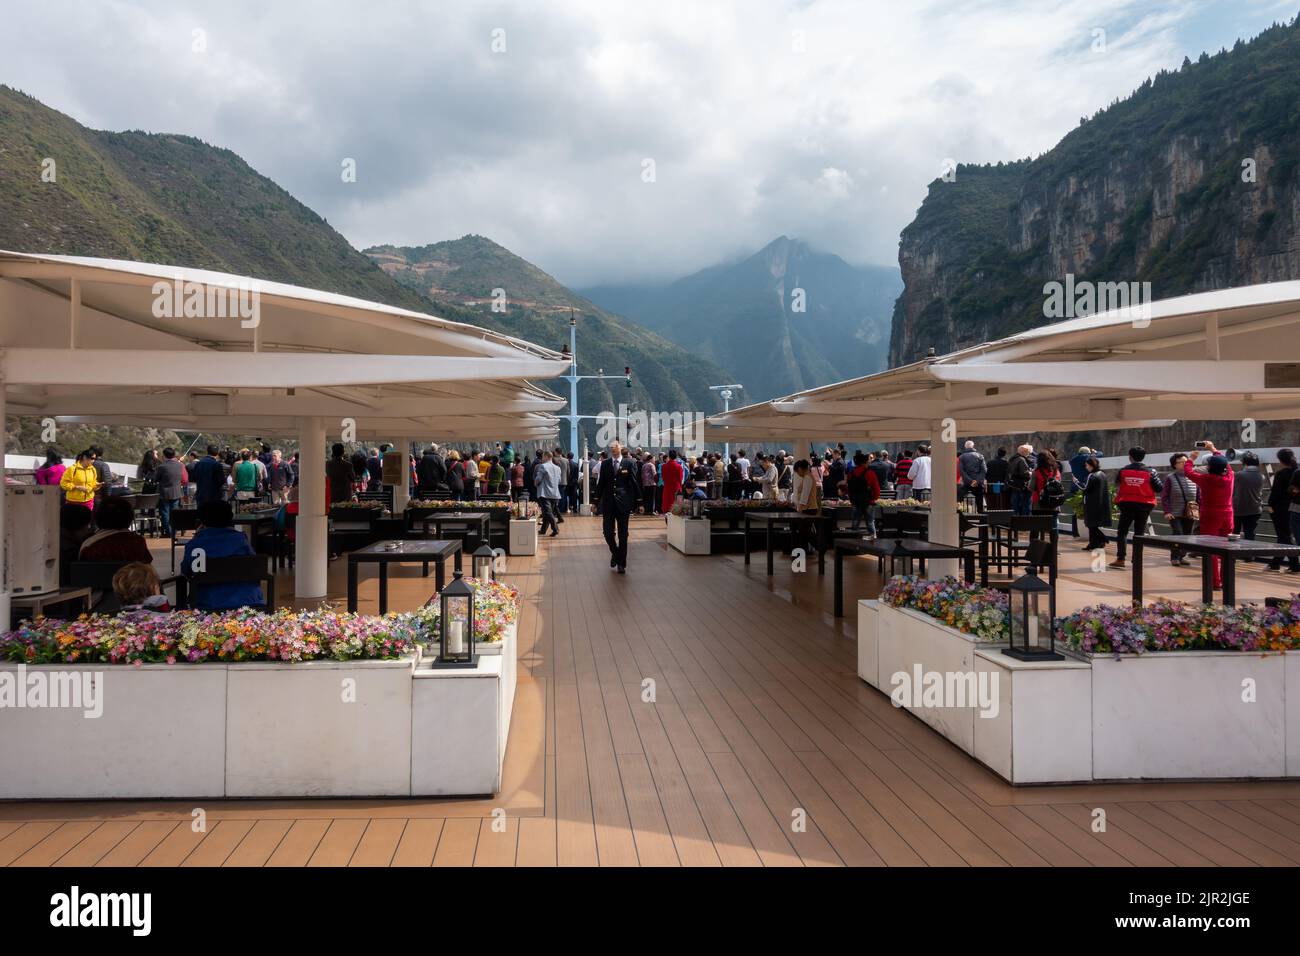 Guests on board a river cruise admire scenery of the Three Gorges on the Yangtze River in China Stock Photo